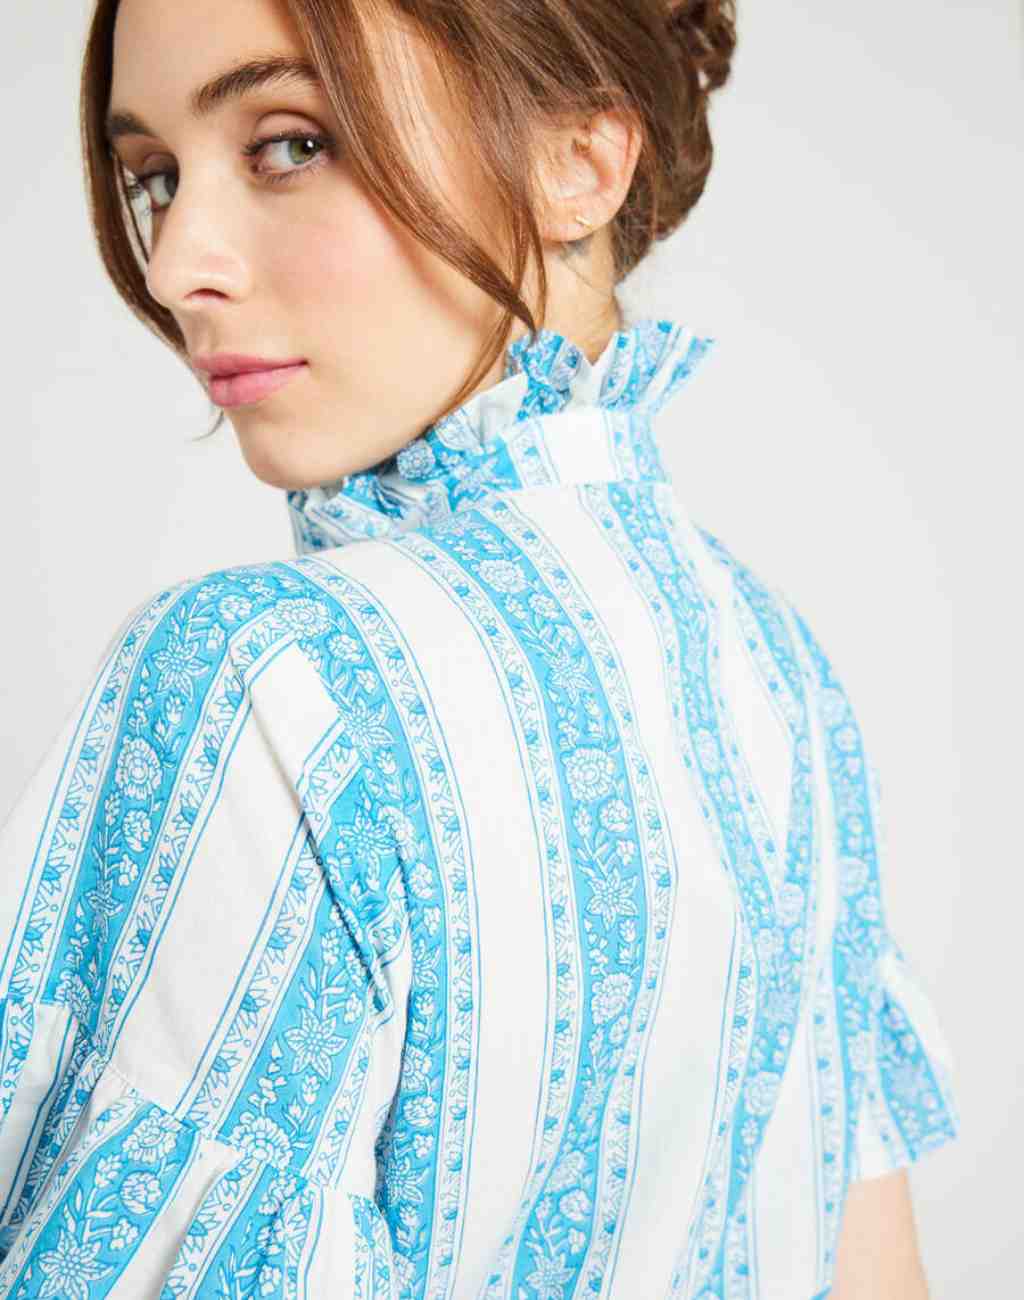 Vanessa Top In Aqua Jaipur Stripe with Ruffled Collar and Short Sleeves